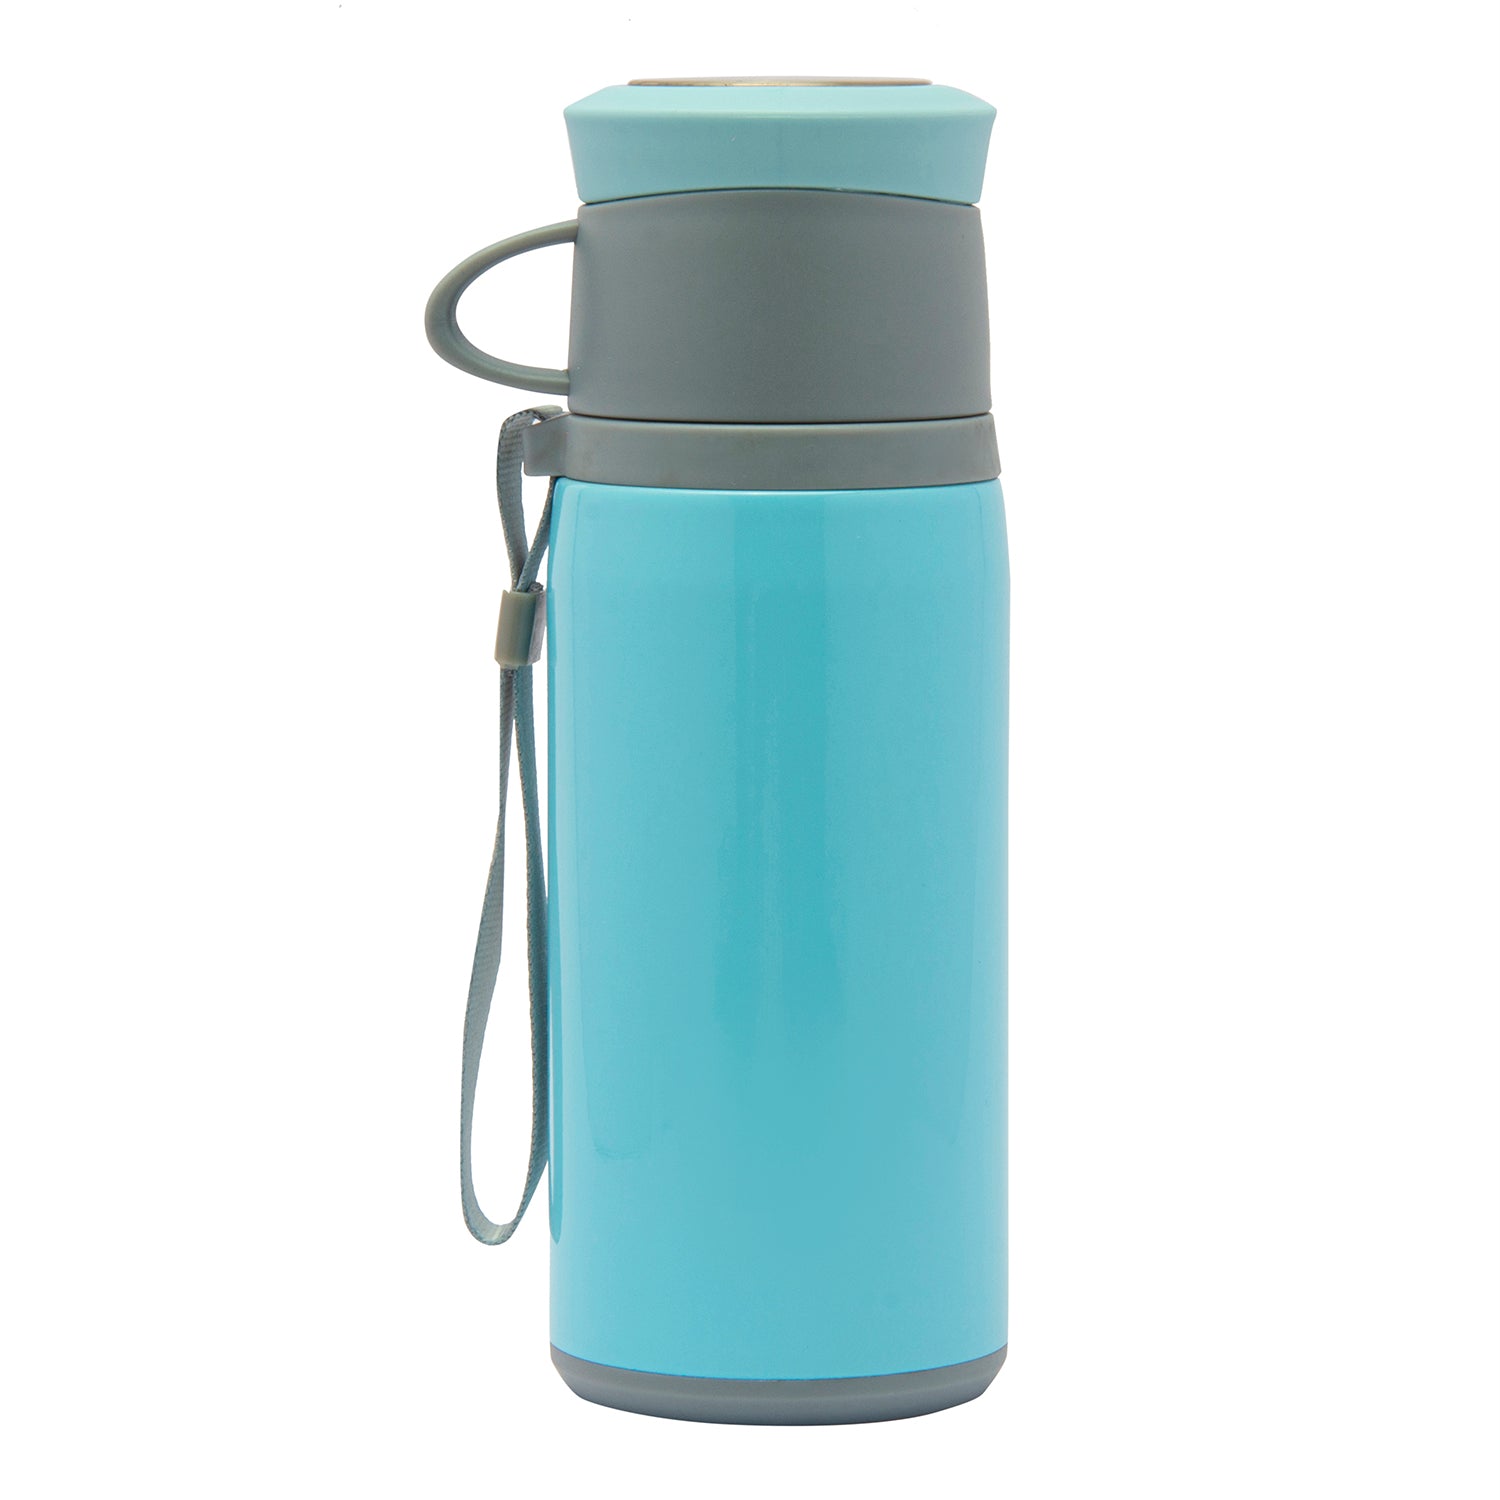 Solid Blue 350 ml Stainless Steel Flask - Baby Moo